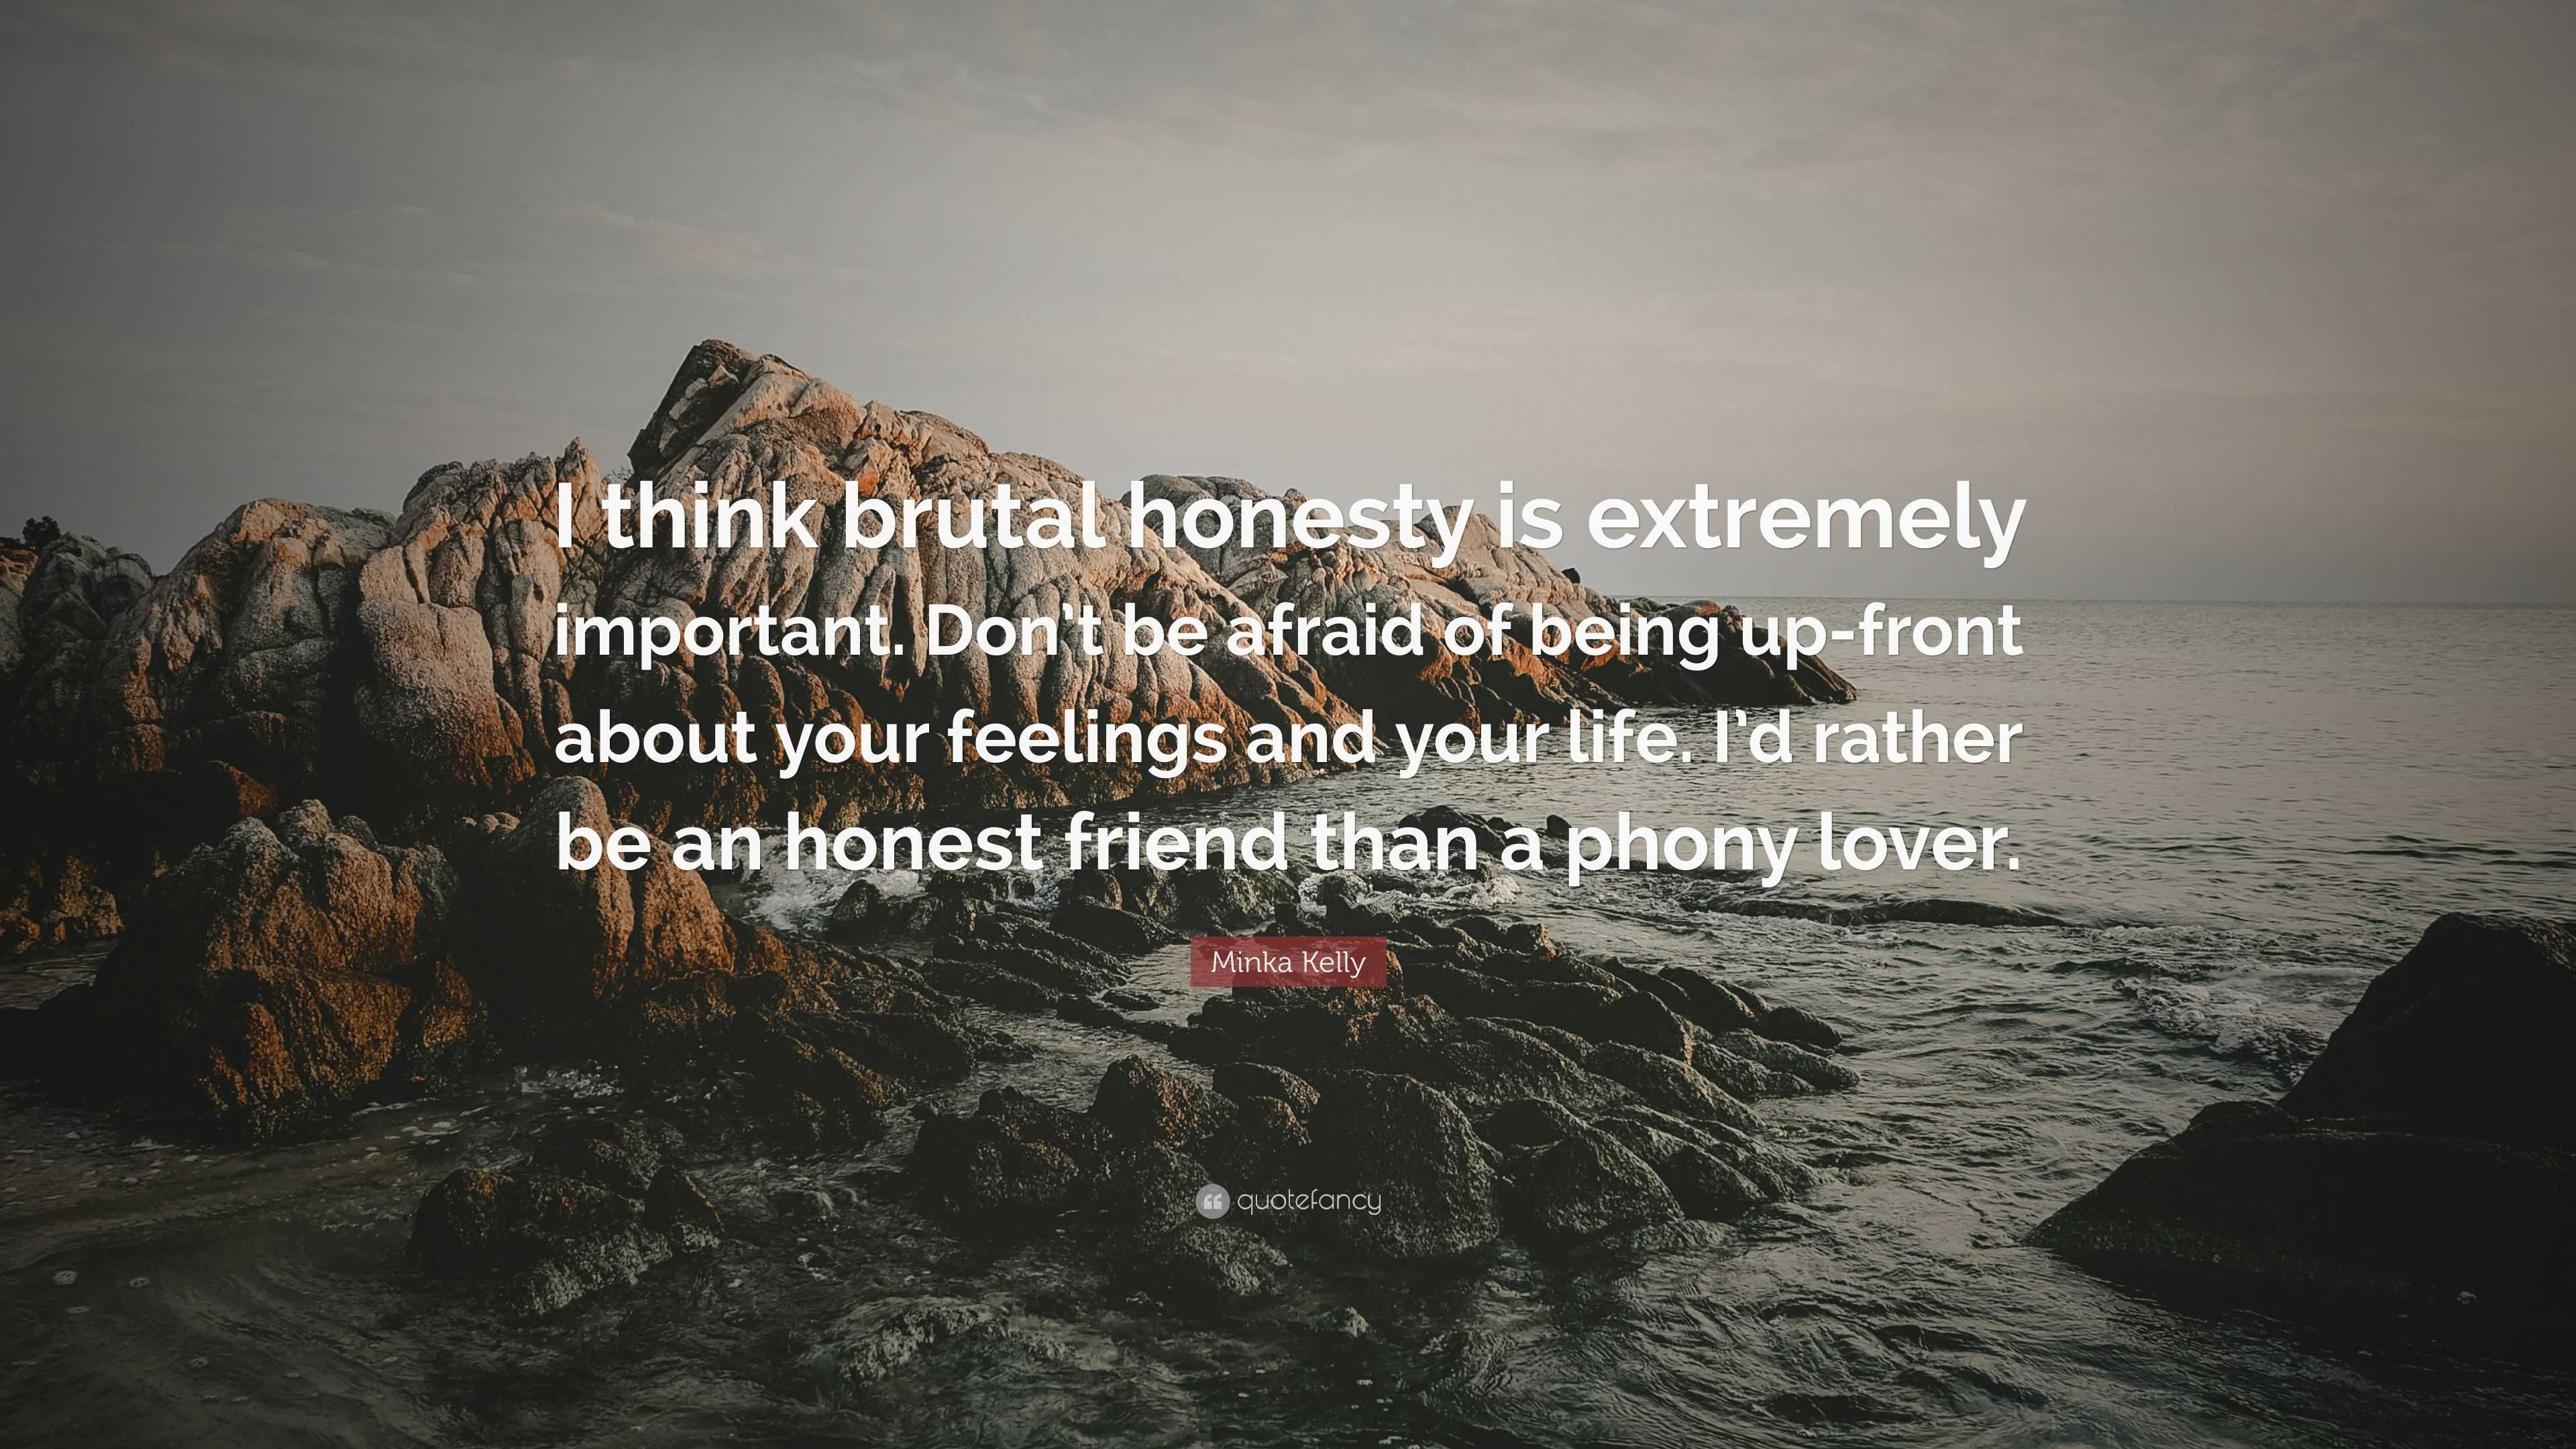 Minka Kelly Quote: “I think brutal honesty is extremely important